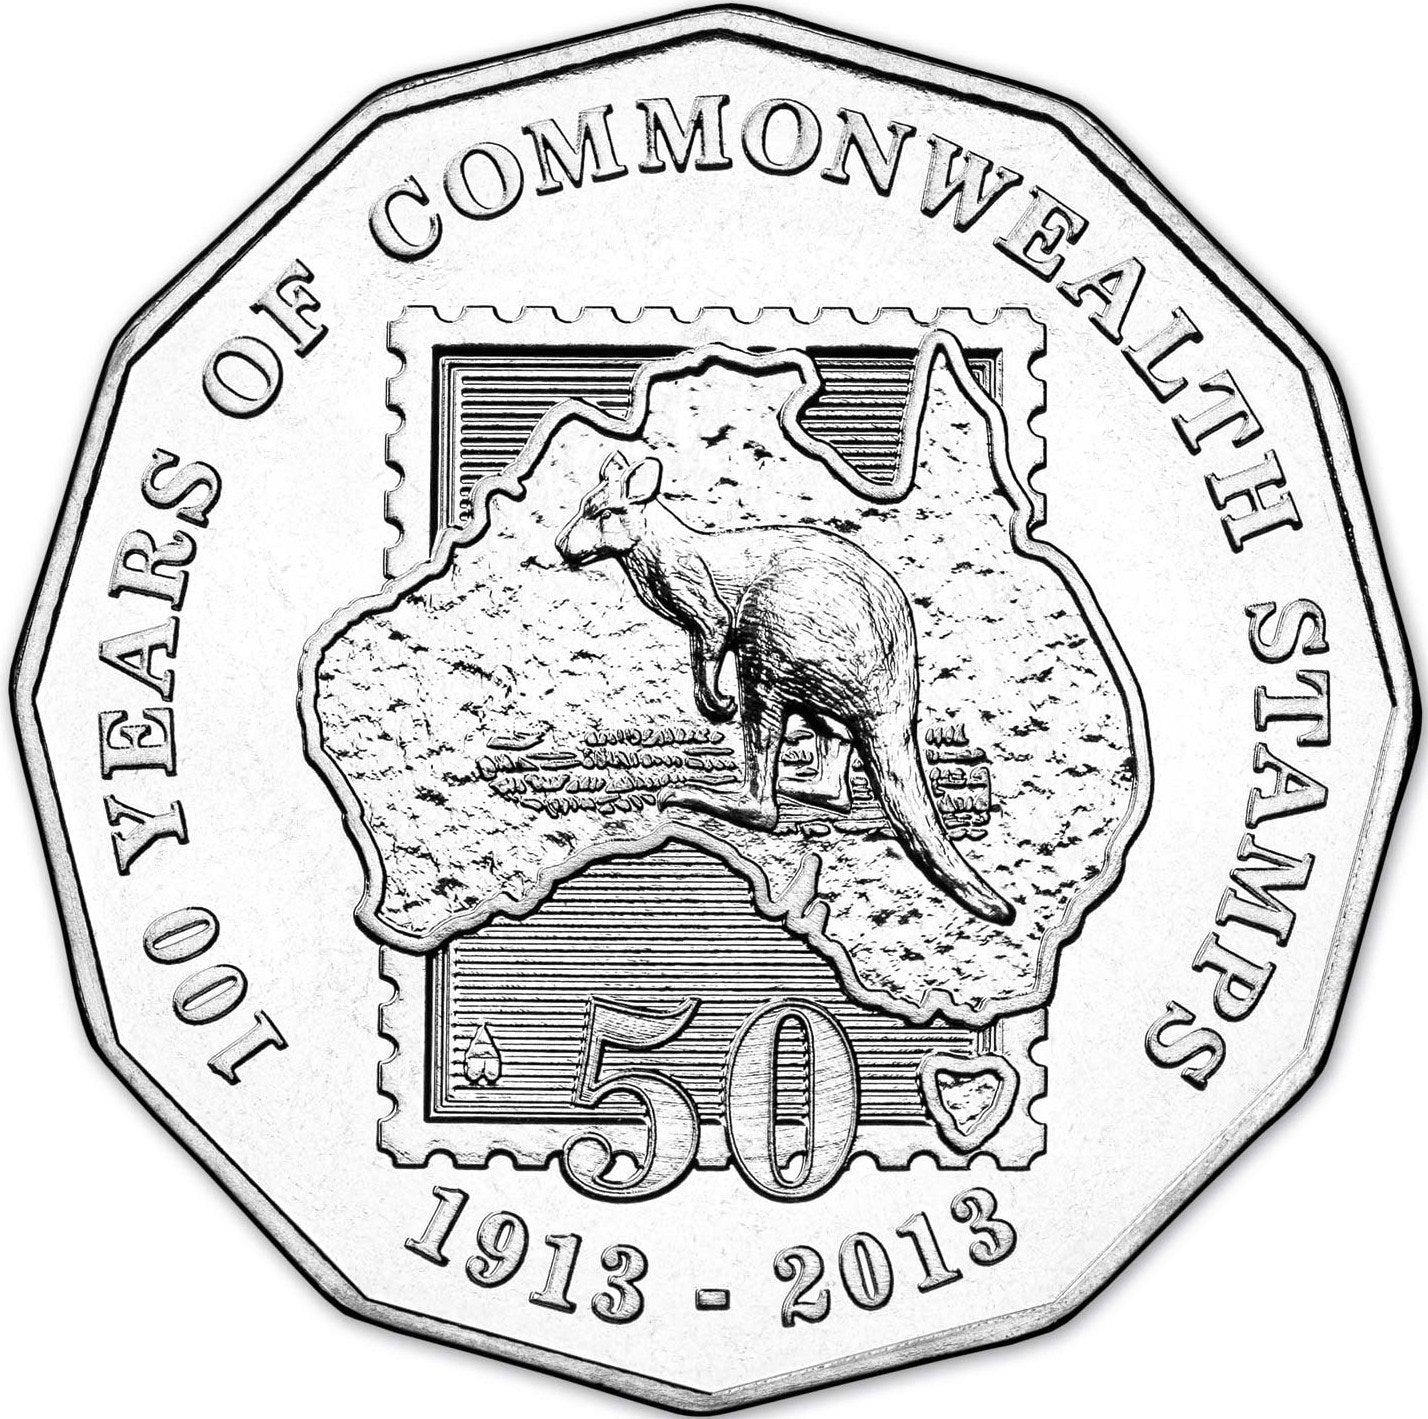 2013 PNC - 100 years of Commonwealth Stamps 1913-2013 - Australia's First Stamp Anniversary - Loose Change Coins